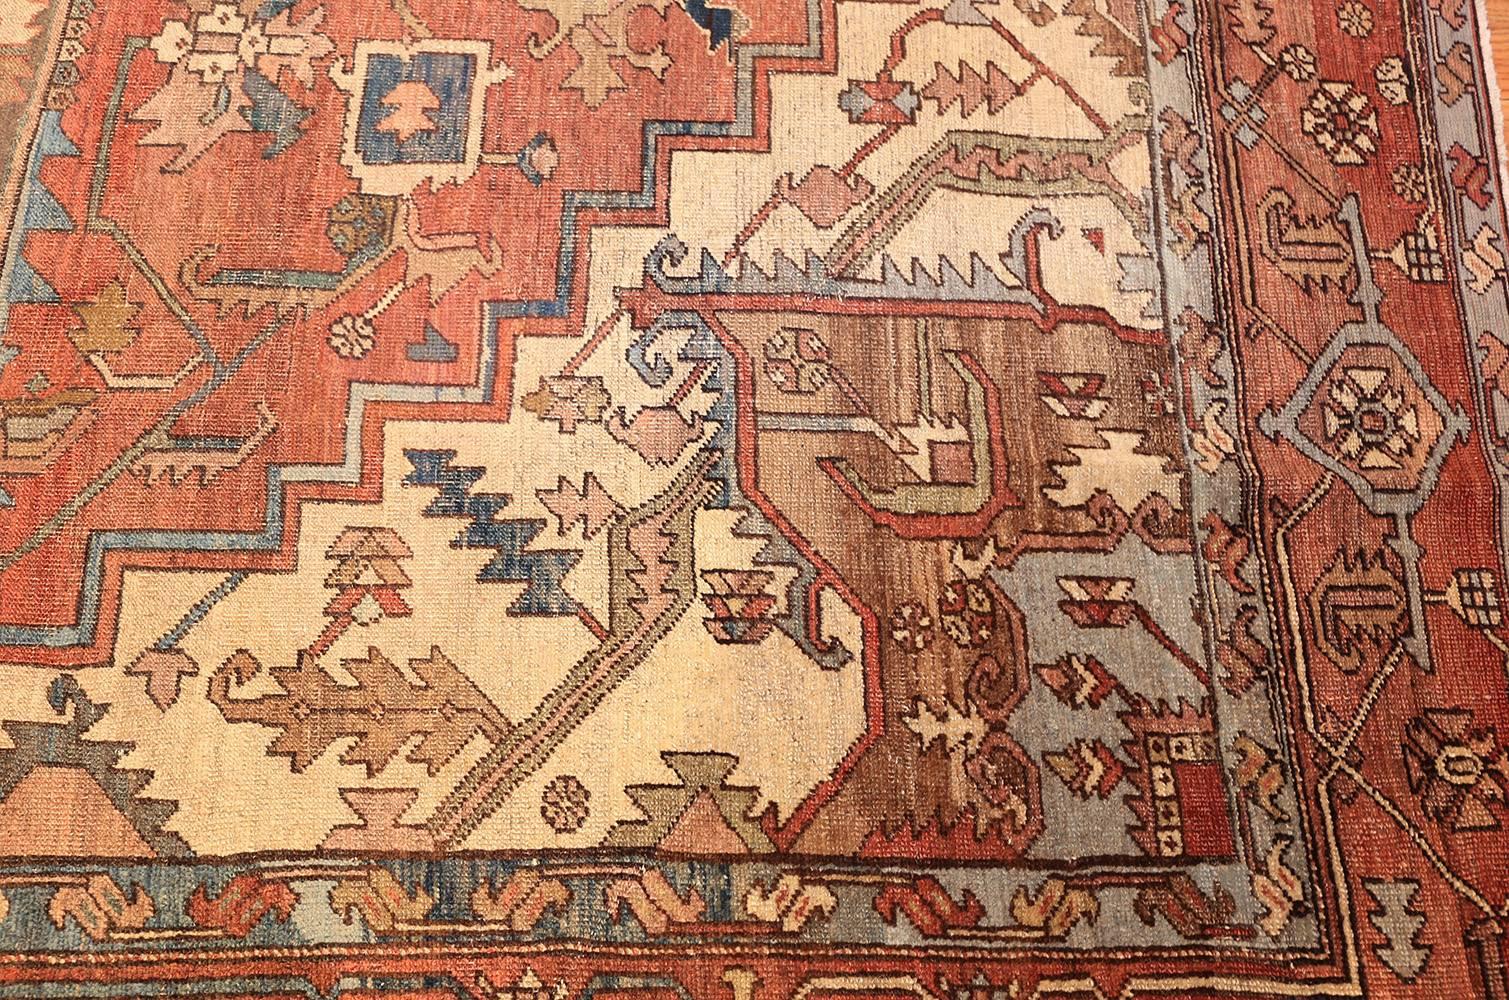 20th Century Room Sized Antique Persian Serapi Carpet. Size: 9 ft 9 in x 12 ft 10 in